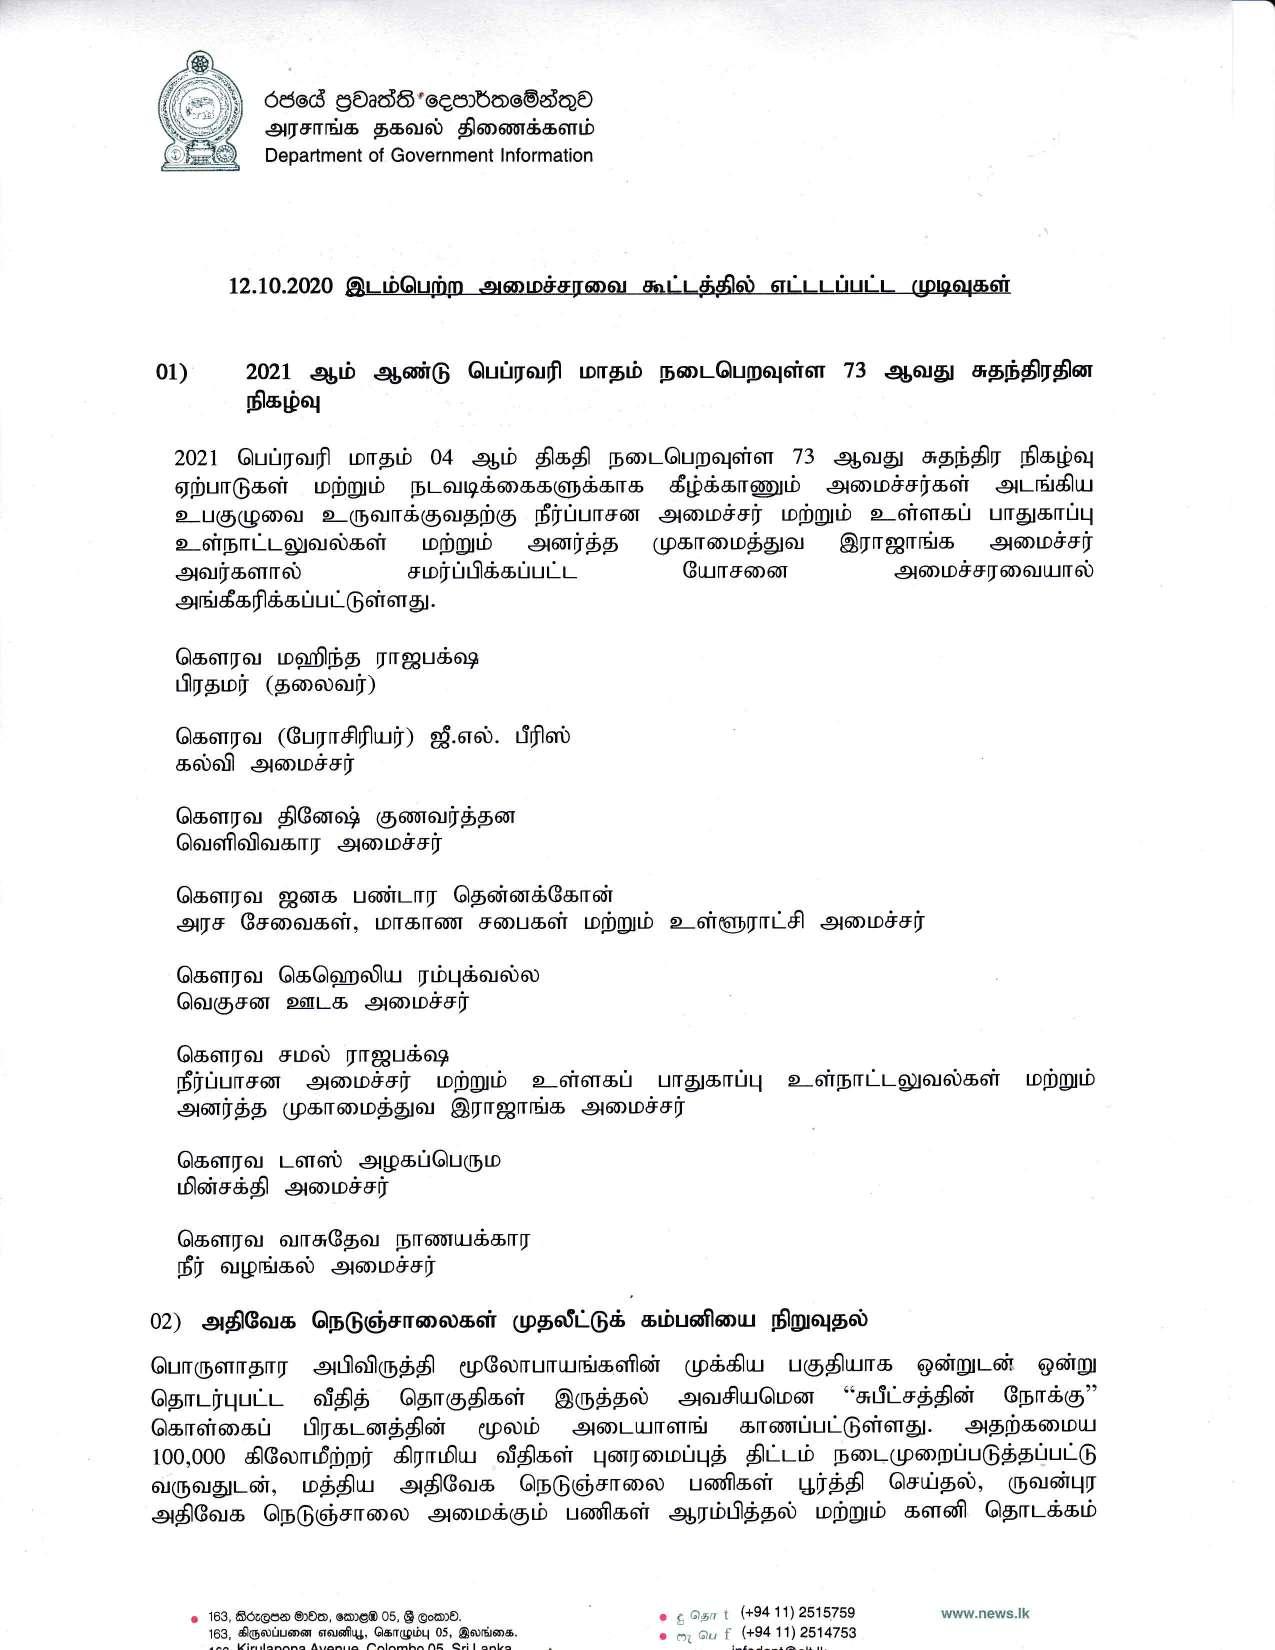 Cabinet Decision on 12.10.2020 Tamil compressed page 001